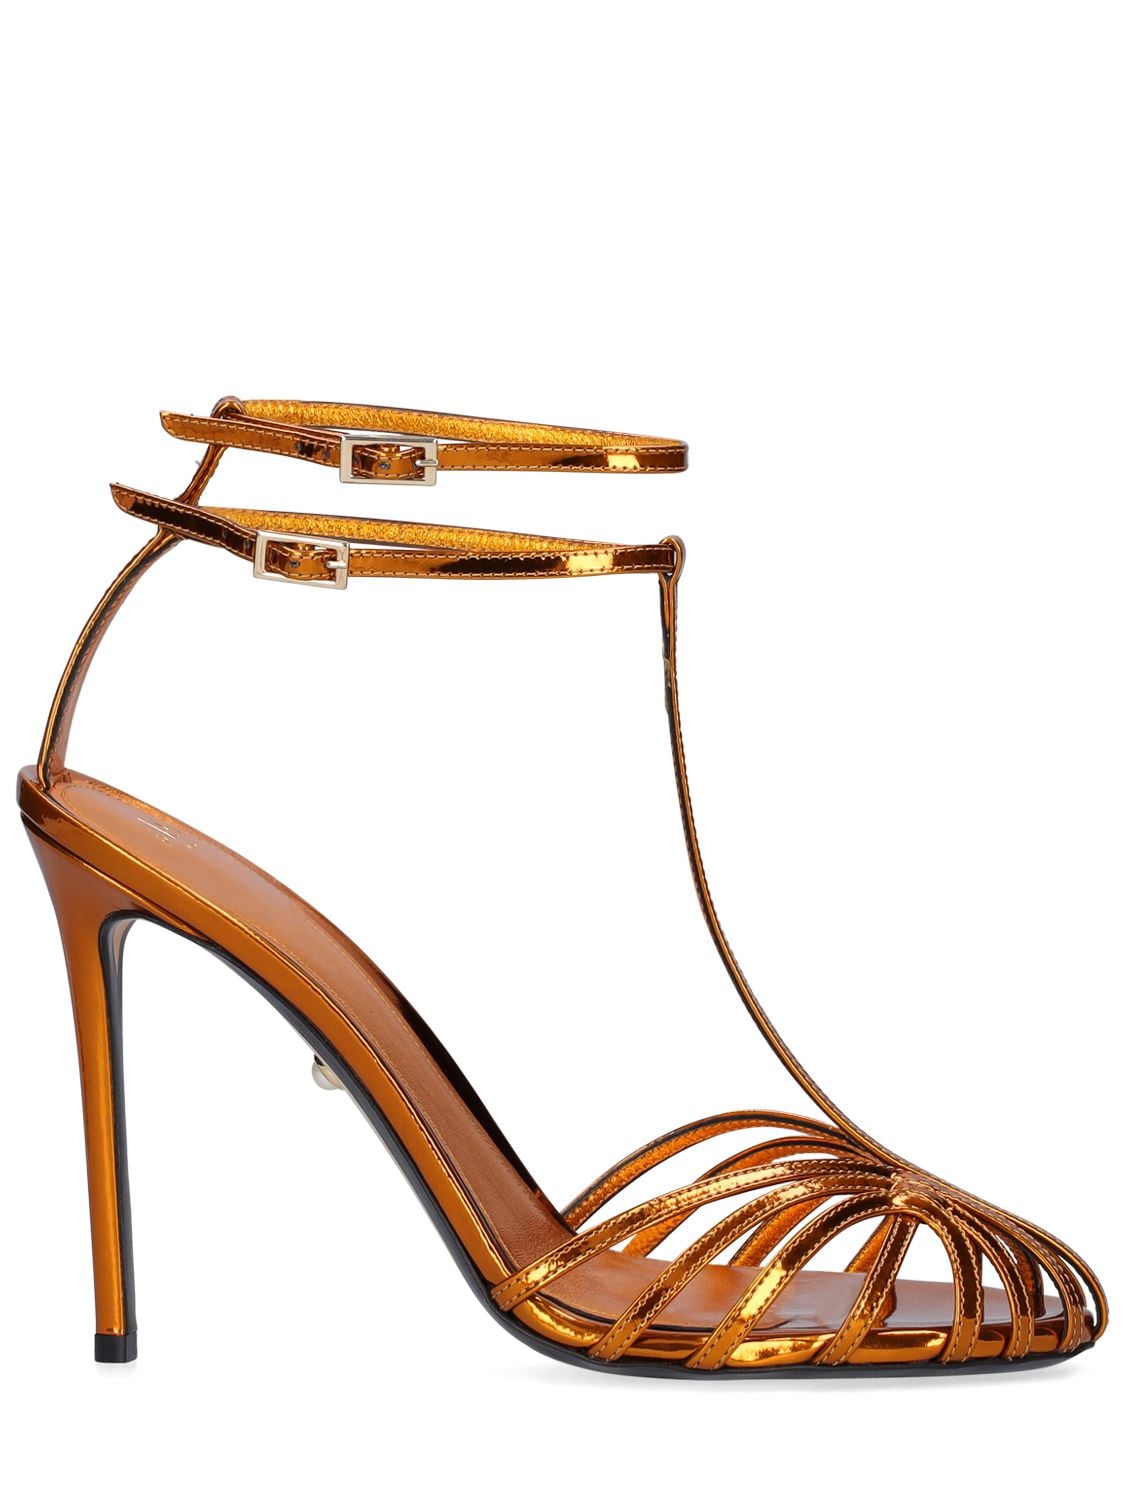 ALEVÌ 110MM STELLA LAMINATED LEATHER SANDALS